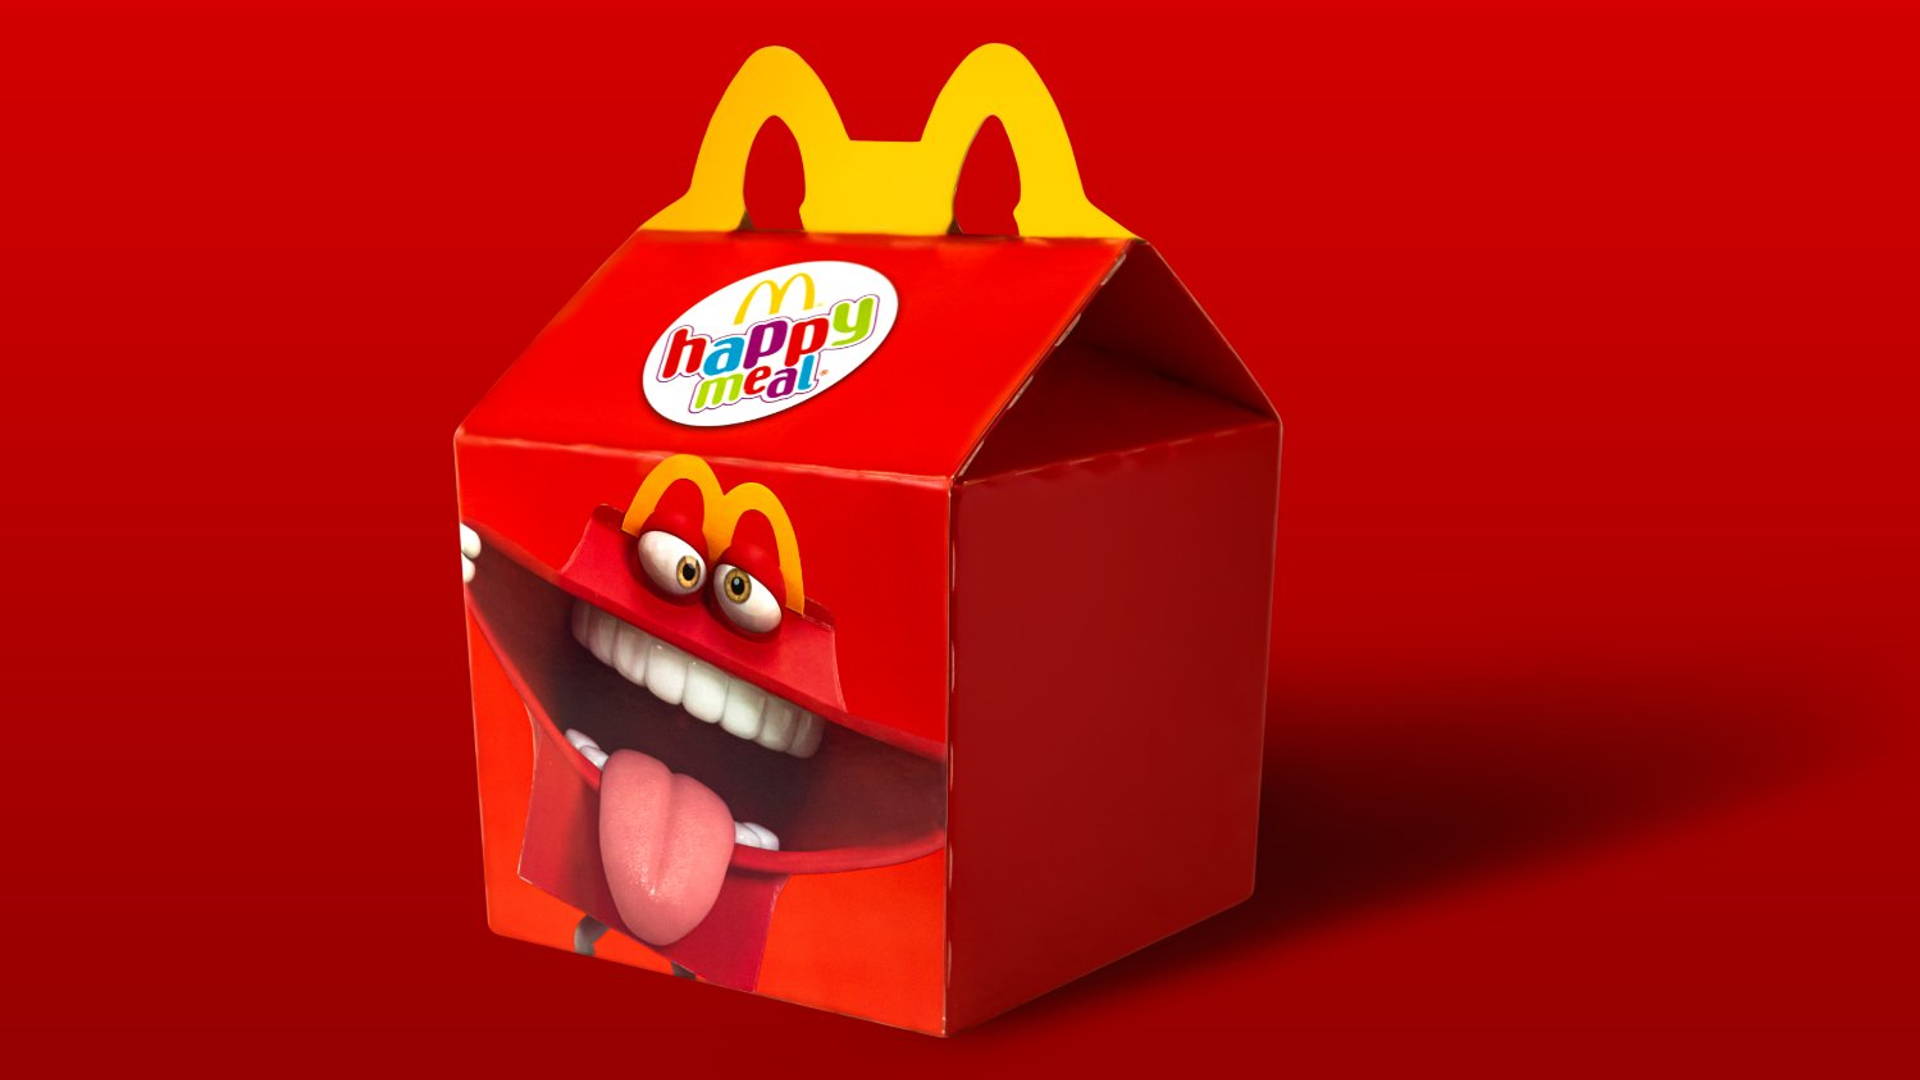 Featured image for McDonald's UK Helps Stay-At-Home Parents Recreate Happy Meal Boxes